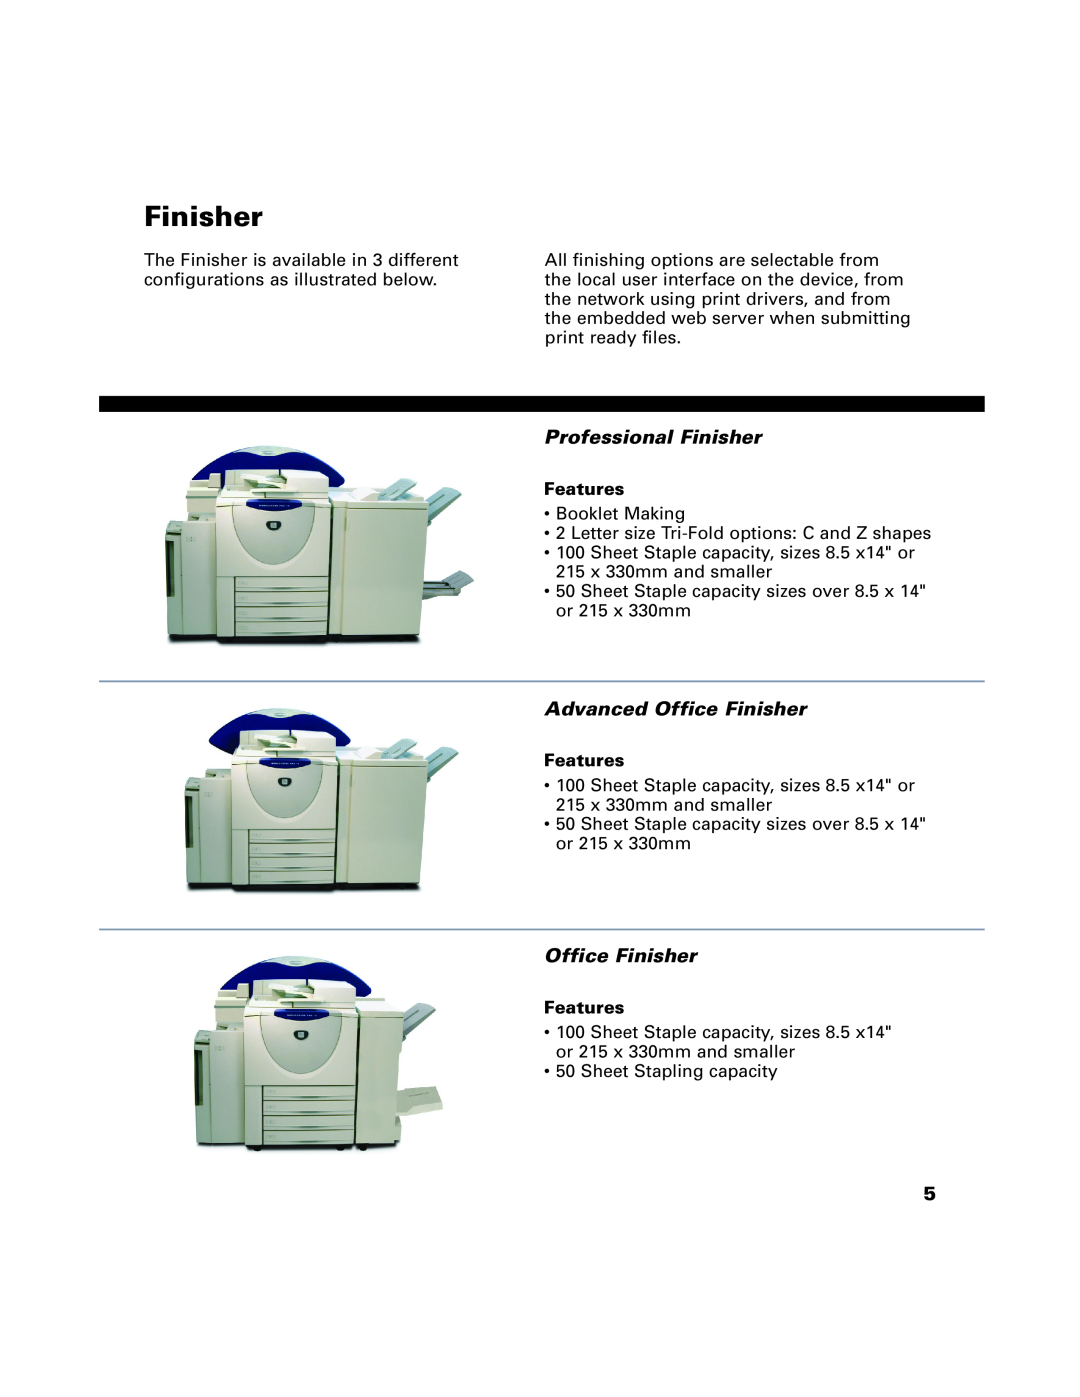 Xerox C65, C75, C90, 65, 75, 90 manual Professional Finisher, Advanced Office Finisher, Features 